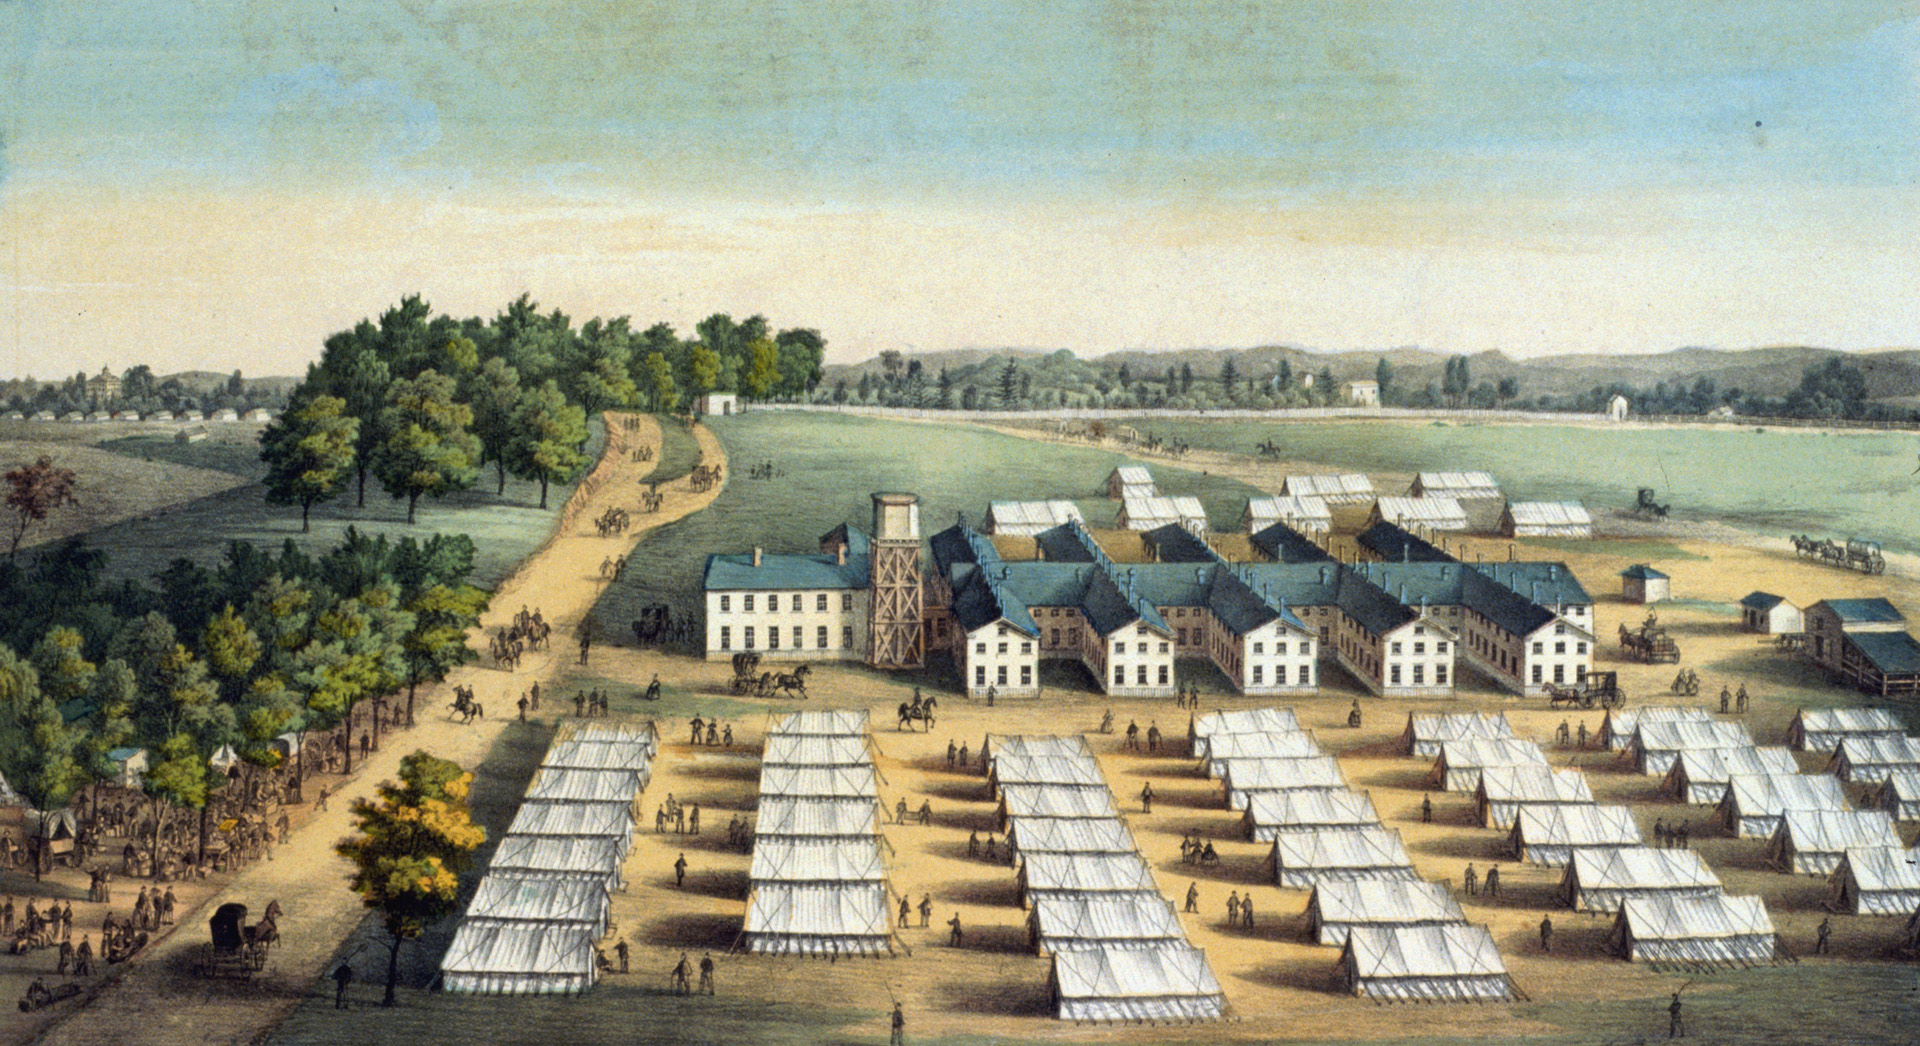 A misleadingly bucolic image of Mount Pleasant Hospital in Washington. Tents in the foreground held overflow patients. In all, there were 35 army hospitals in the nation’s capital.